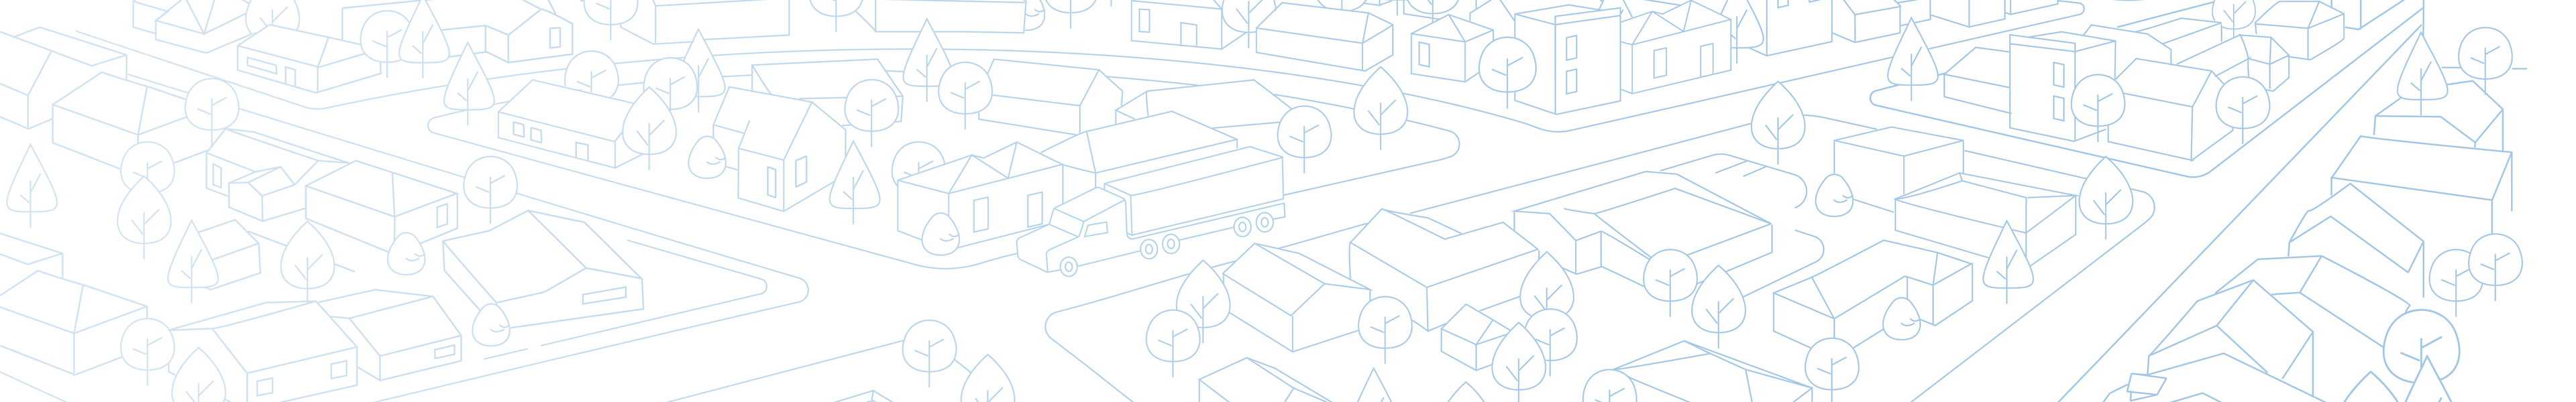 illustration of city with moving truck - United Van Lines®